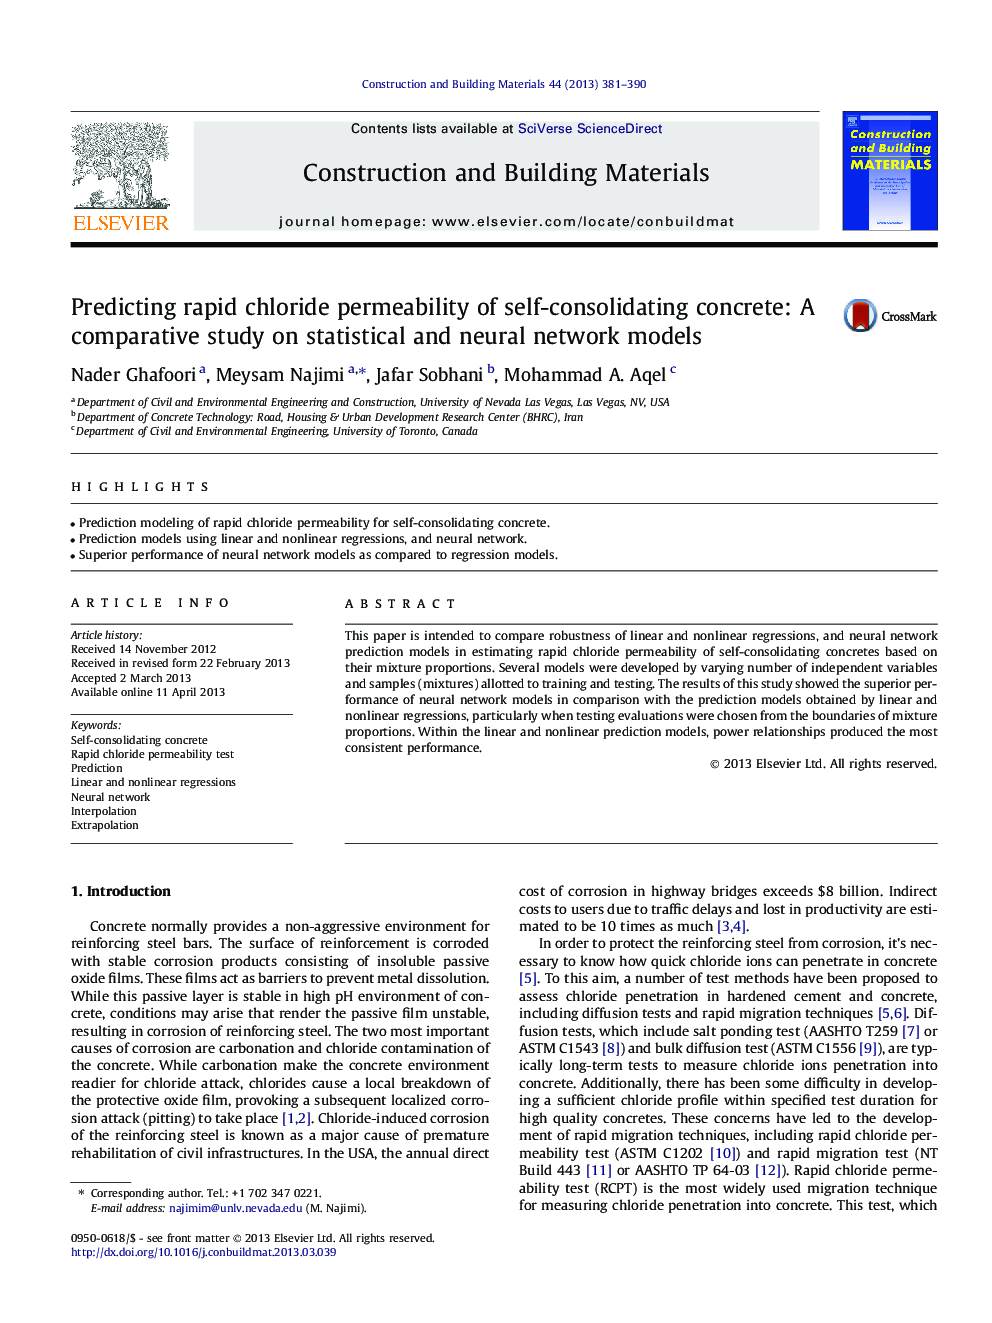 Predicting rapid chloride permeability of self-consolidating concrete: A comparative study on statistical and neural network models